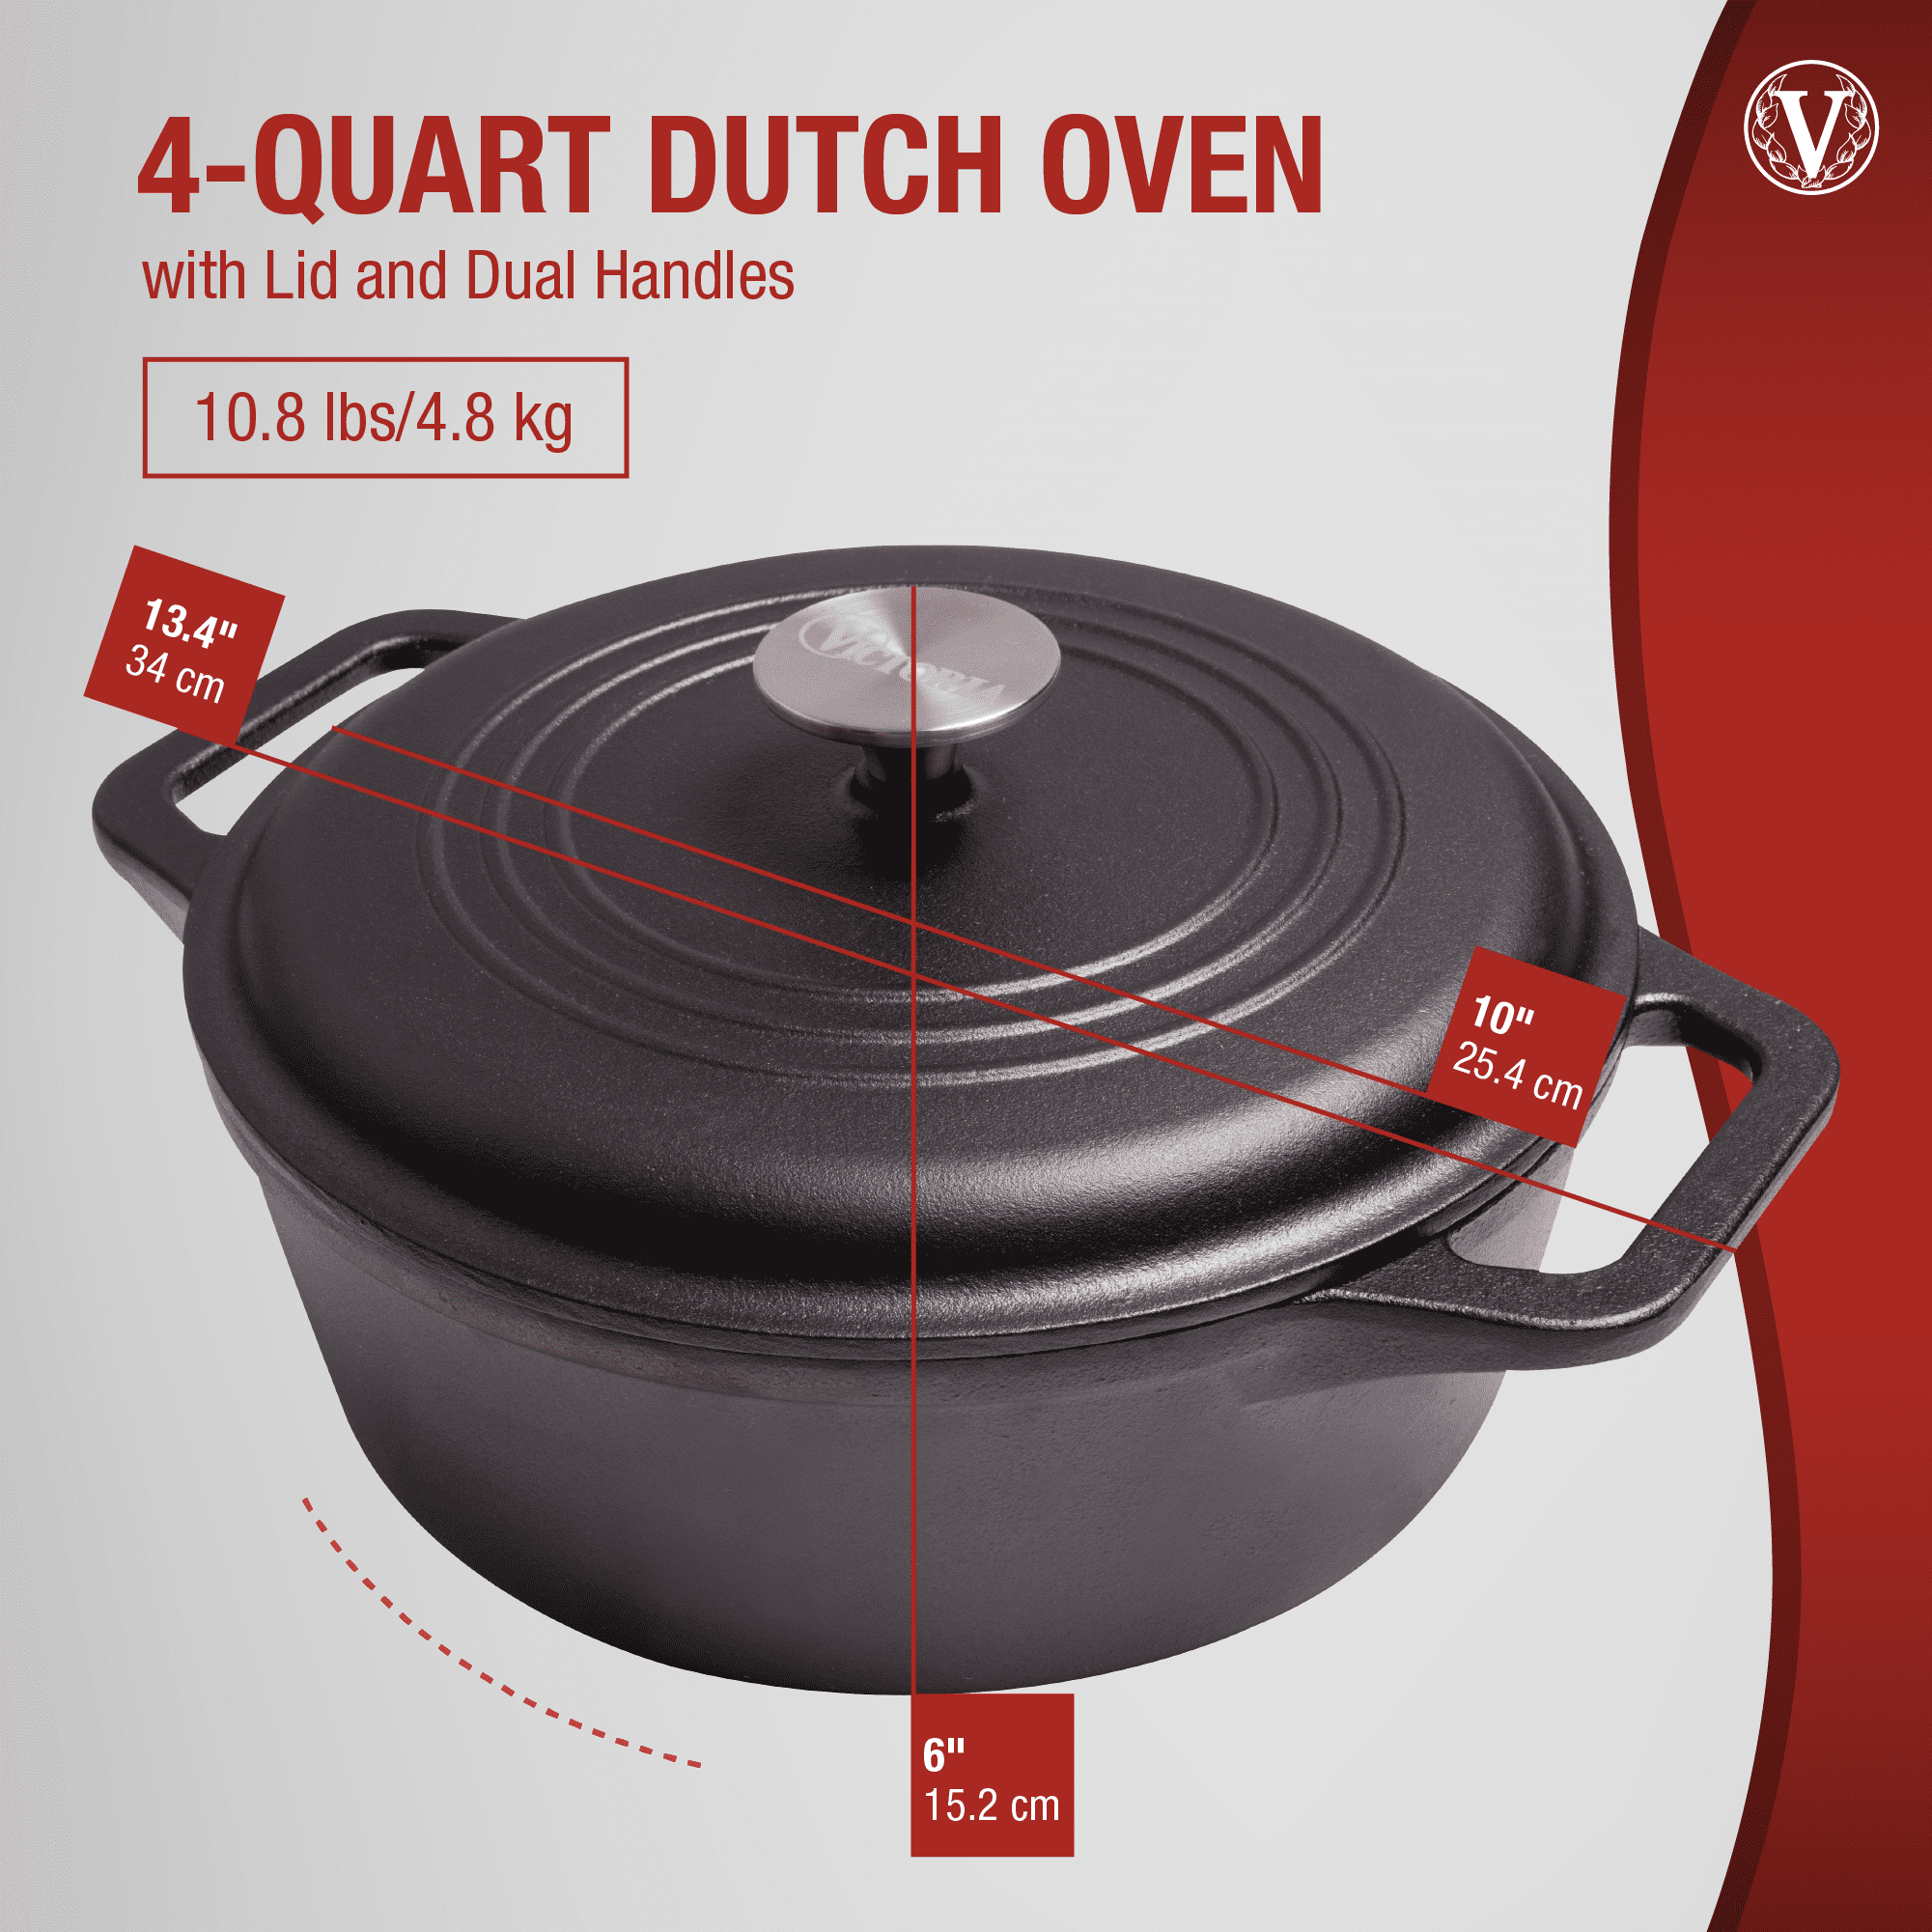 Victoria Cast Iron Large Dutch Oven with Lid and Dual Handles Pot Seasoned 7qt